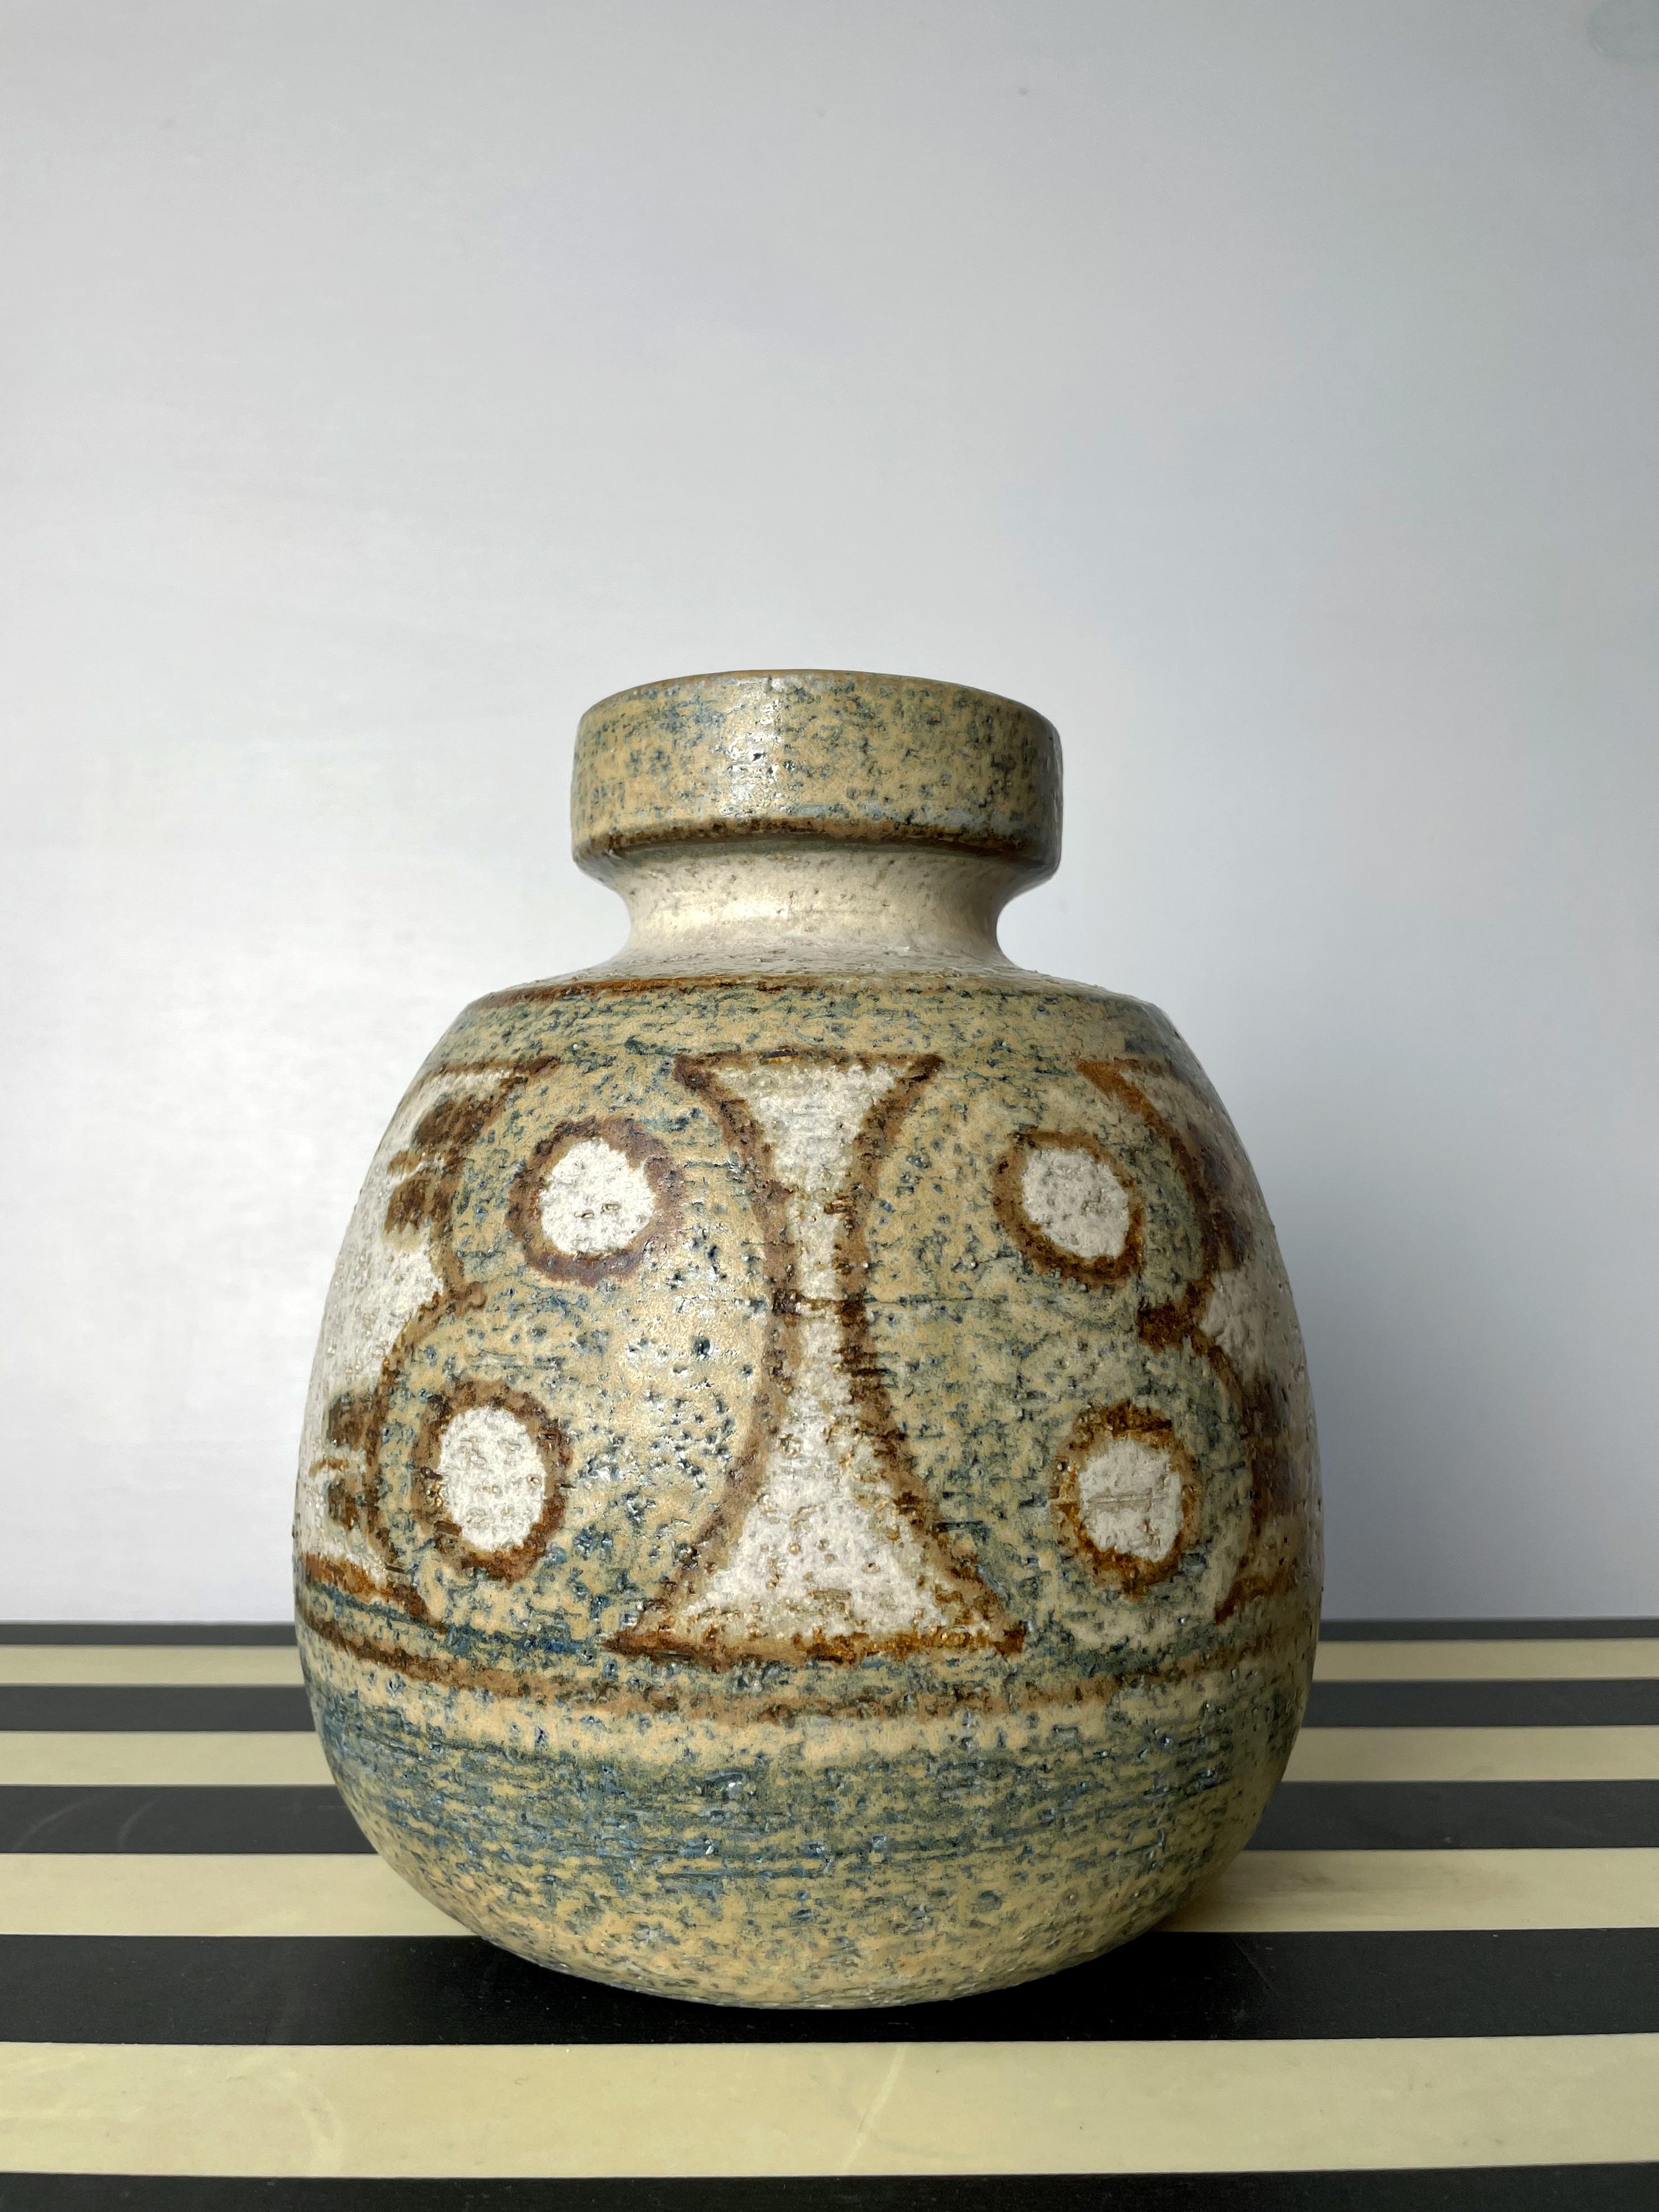 Handmade and handpainted Danish midcentury modern stoneware vase by Noomi Backhausen. Earthy colors in light brown, green and grays in organic symmetrical butterfly-like shapes around the belly of the vase. Manufactured by Søholm Stentøj on the